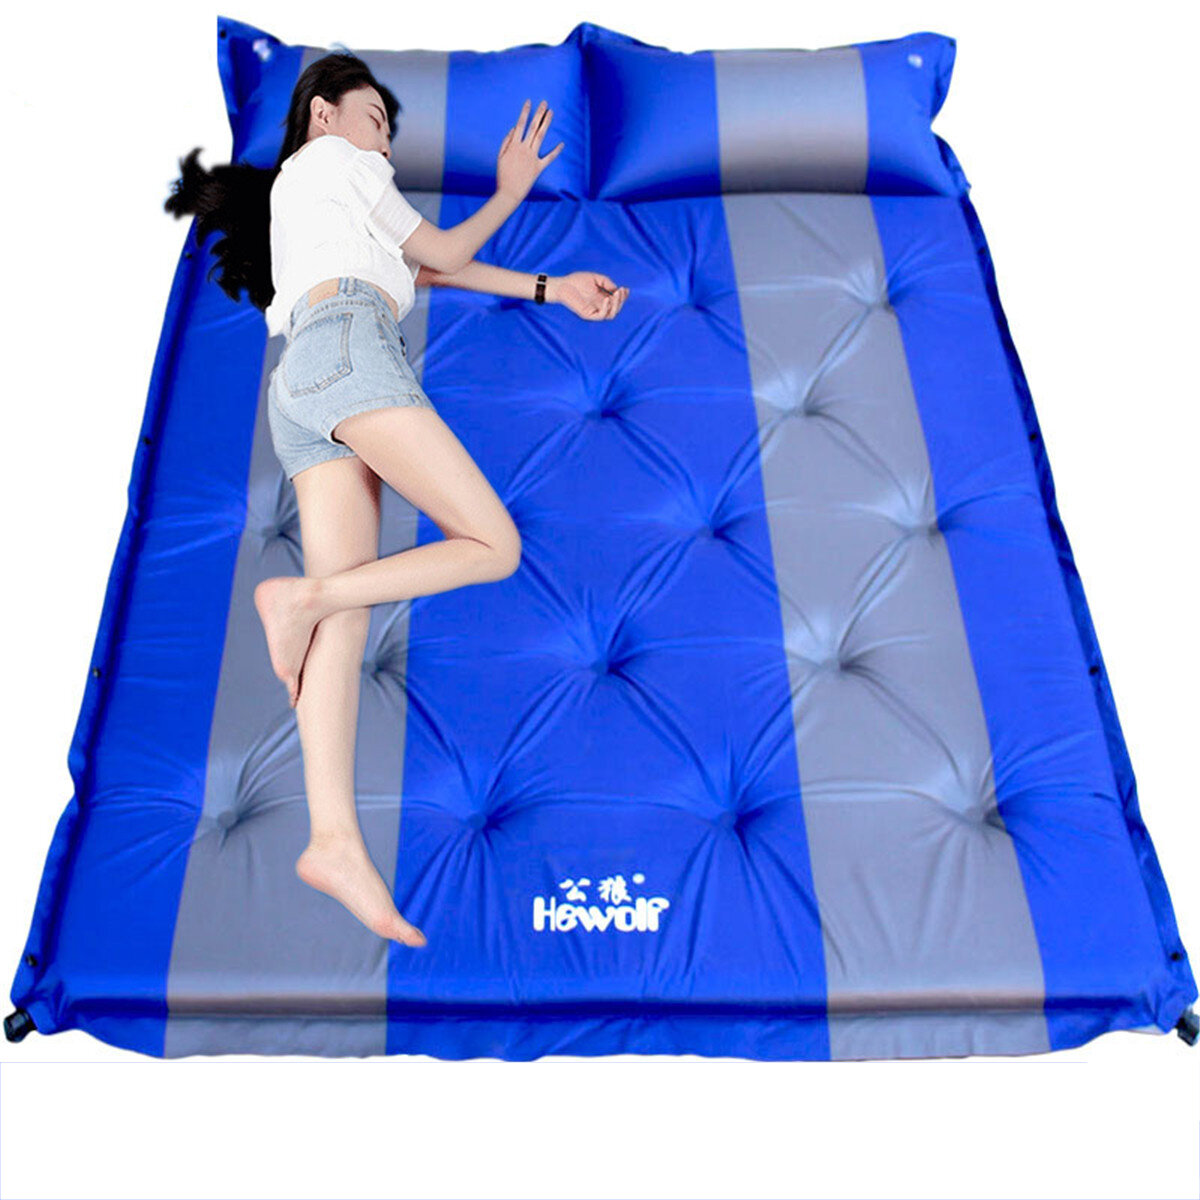  Automatic Inflatable Air Mattresses 2 People Outdoor Mat Camping Hiking Sleeping Cushion Tent Mat